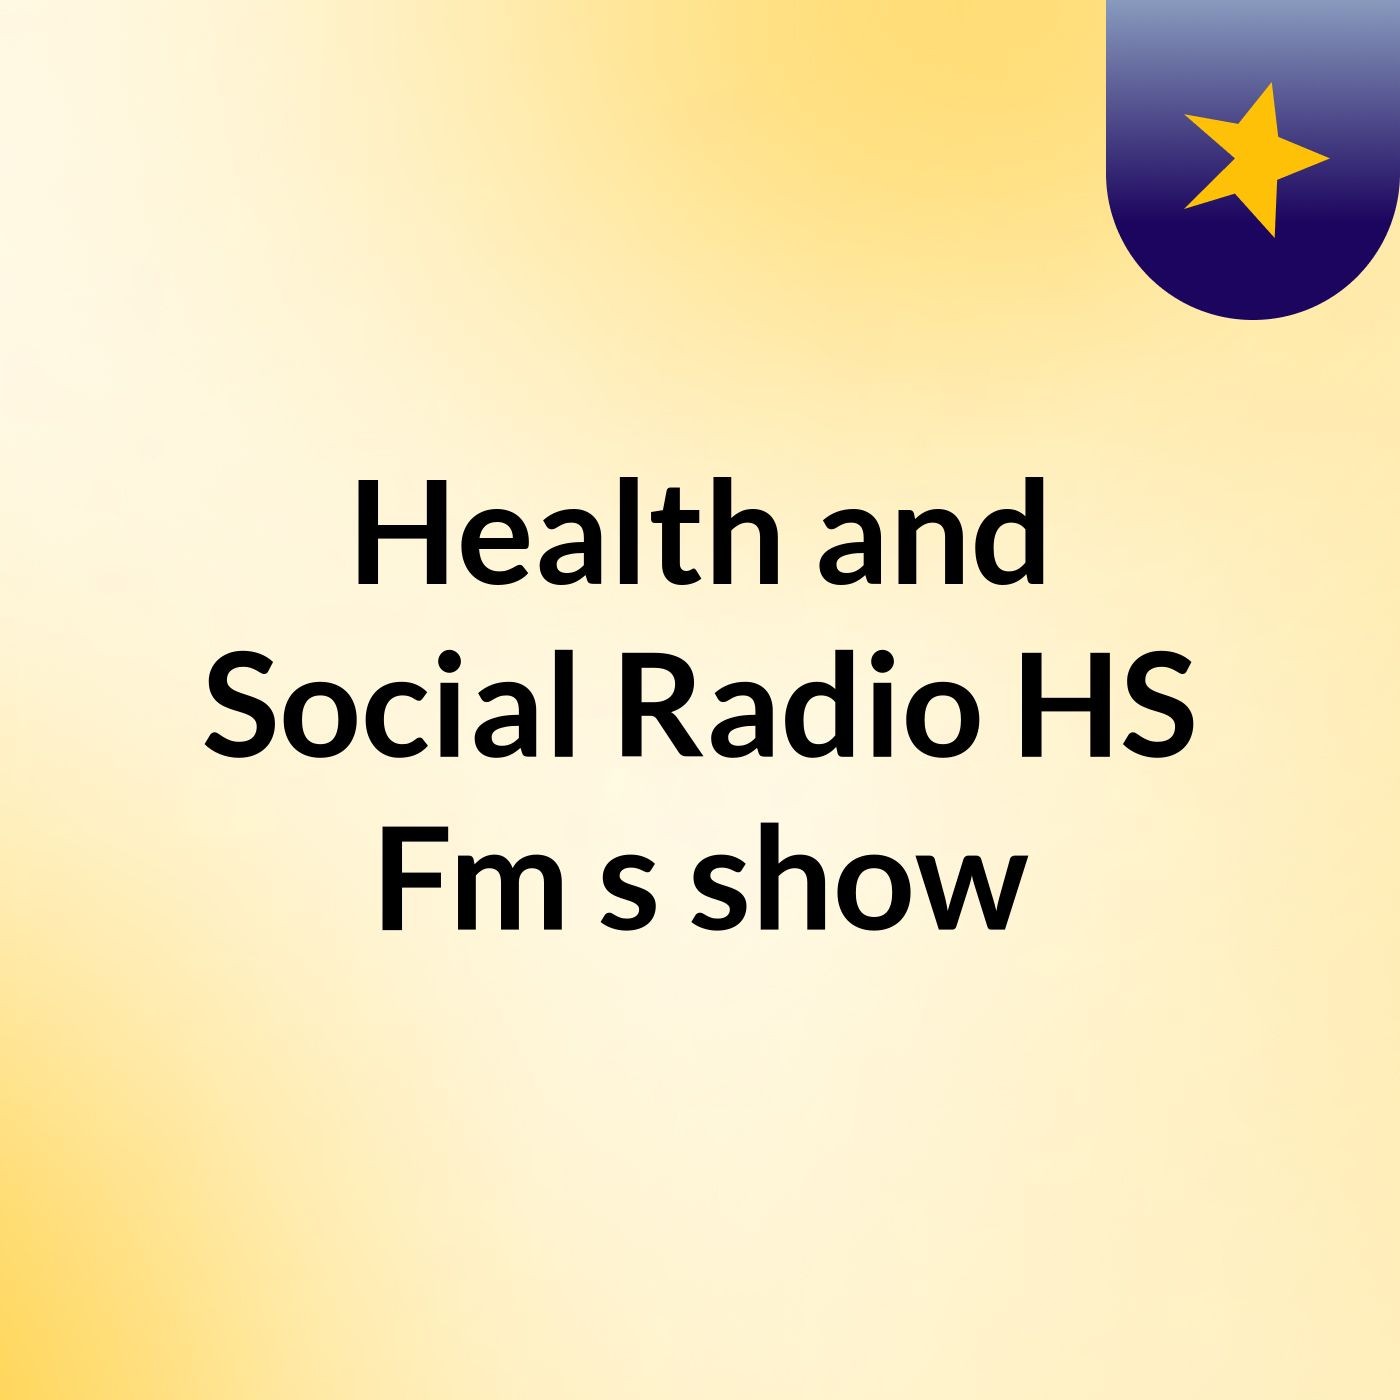 Sunday Cruse With Ruby Stone- Health and Social Radio HS Fm's show